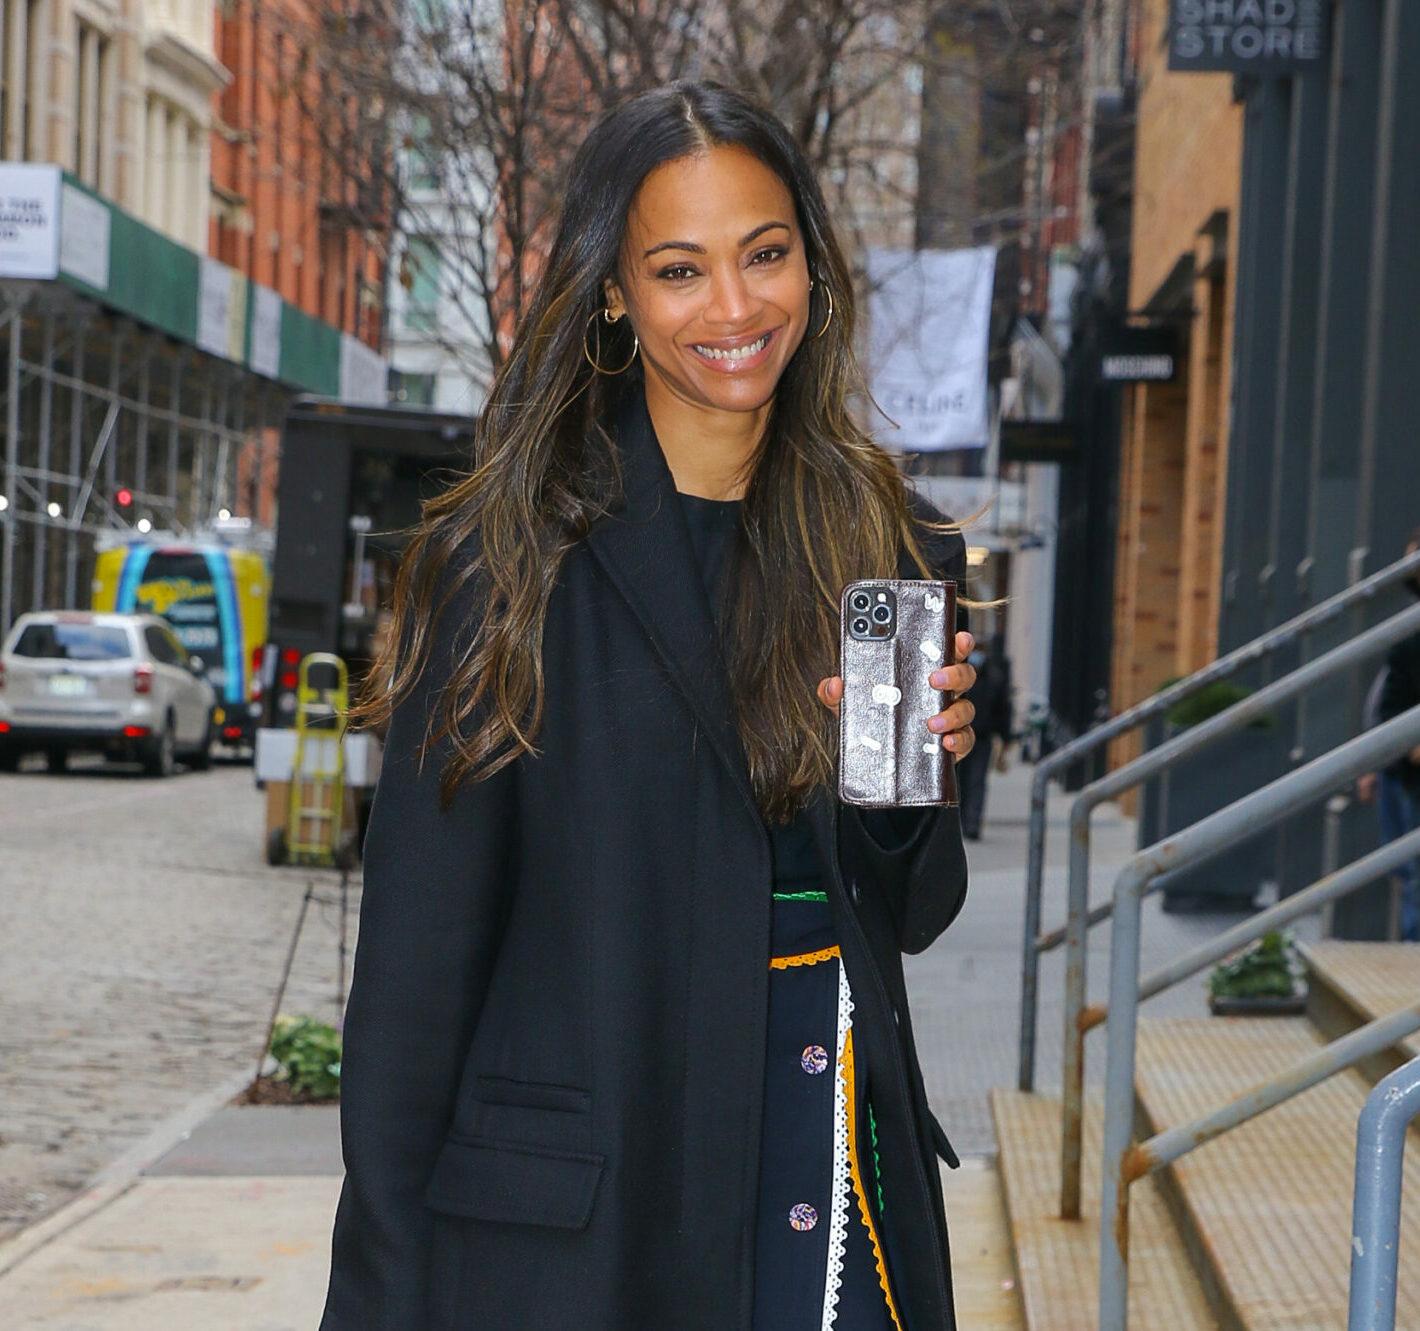 Zoe Saldana is all smiling while arriving for a meeting in SoHo NYC